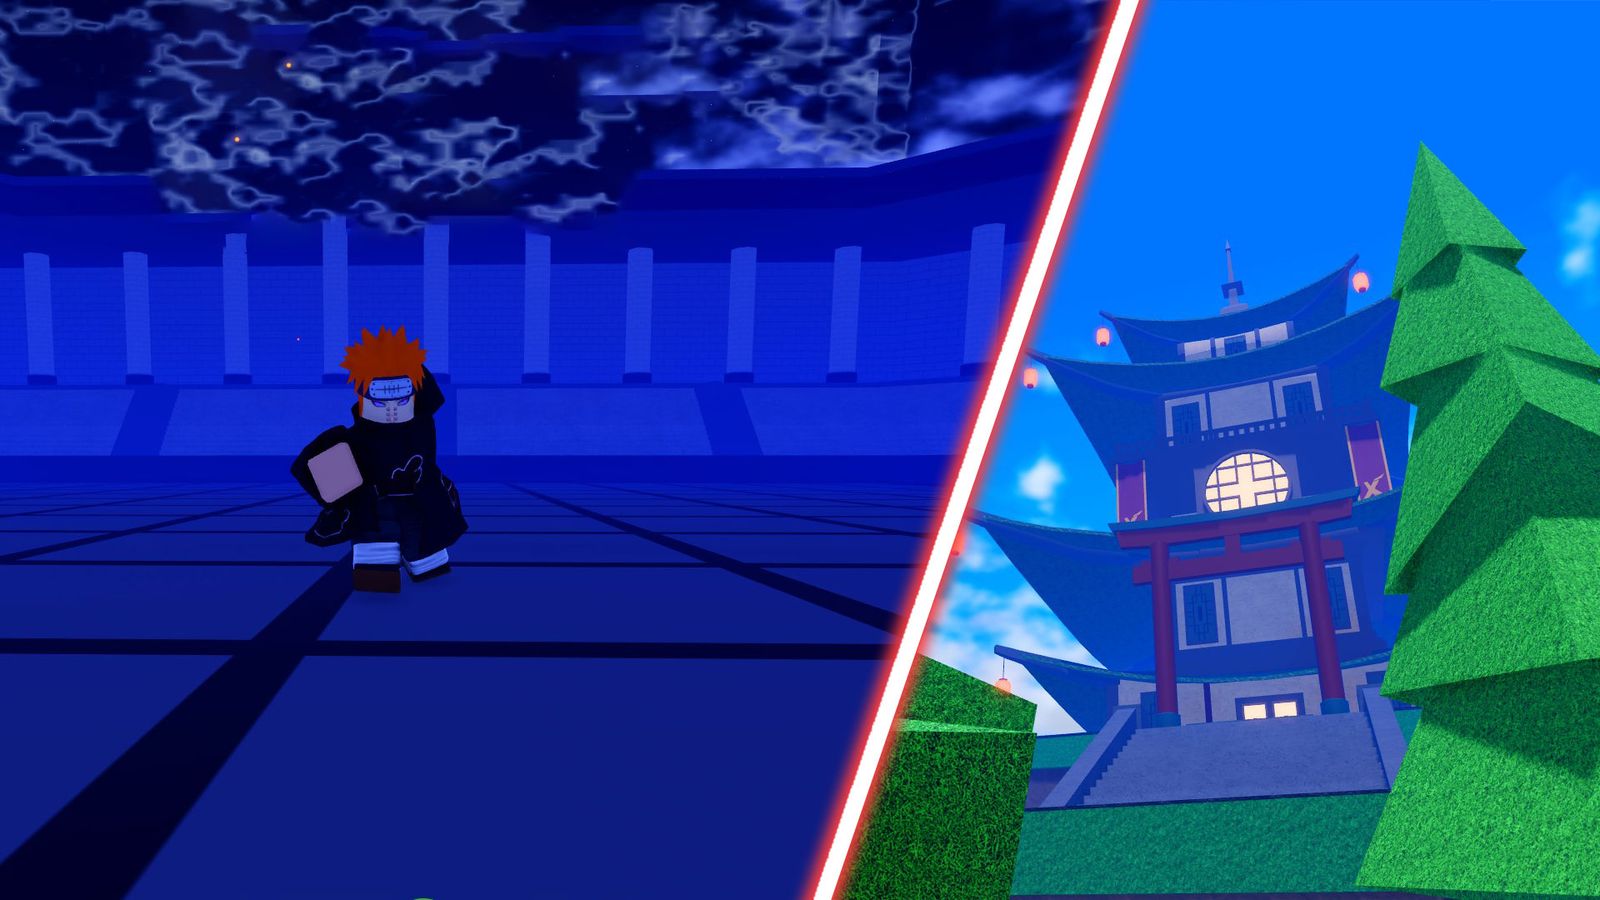 Two screenshots of an anime character battling a boss in Anime Fighting Simulator X, showcasing intense action on a vibrant blue battleground.